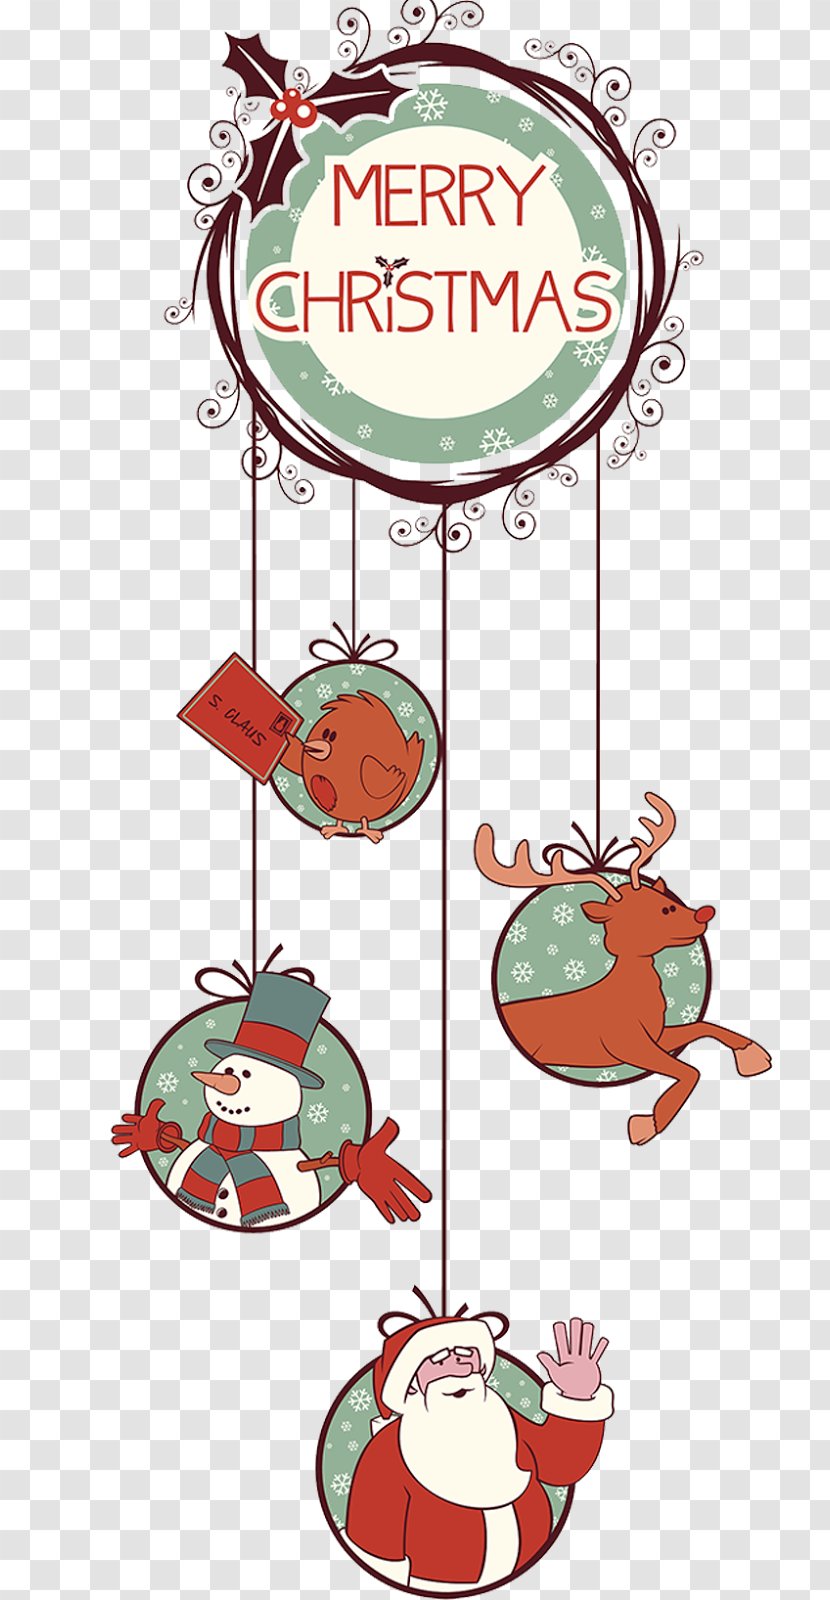 Christmas Tree Ornament Clip Art - Stockings - New Year Decoration Poster Transparent PNG